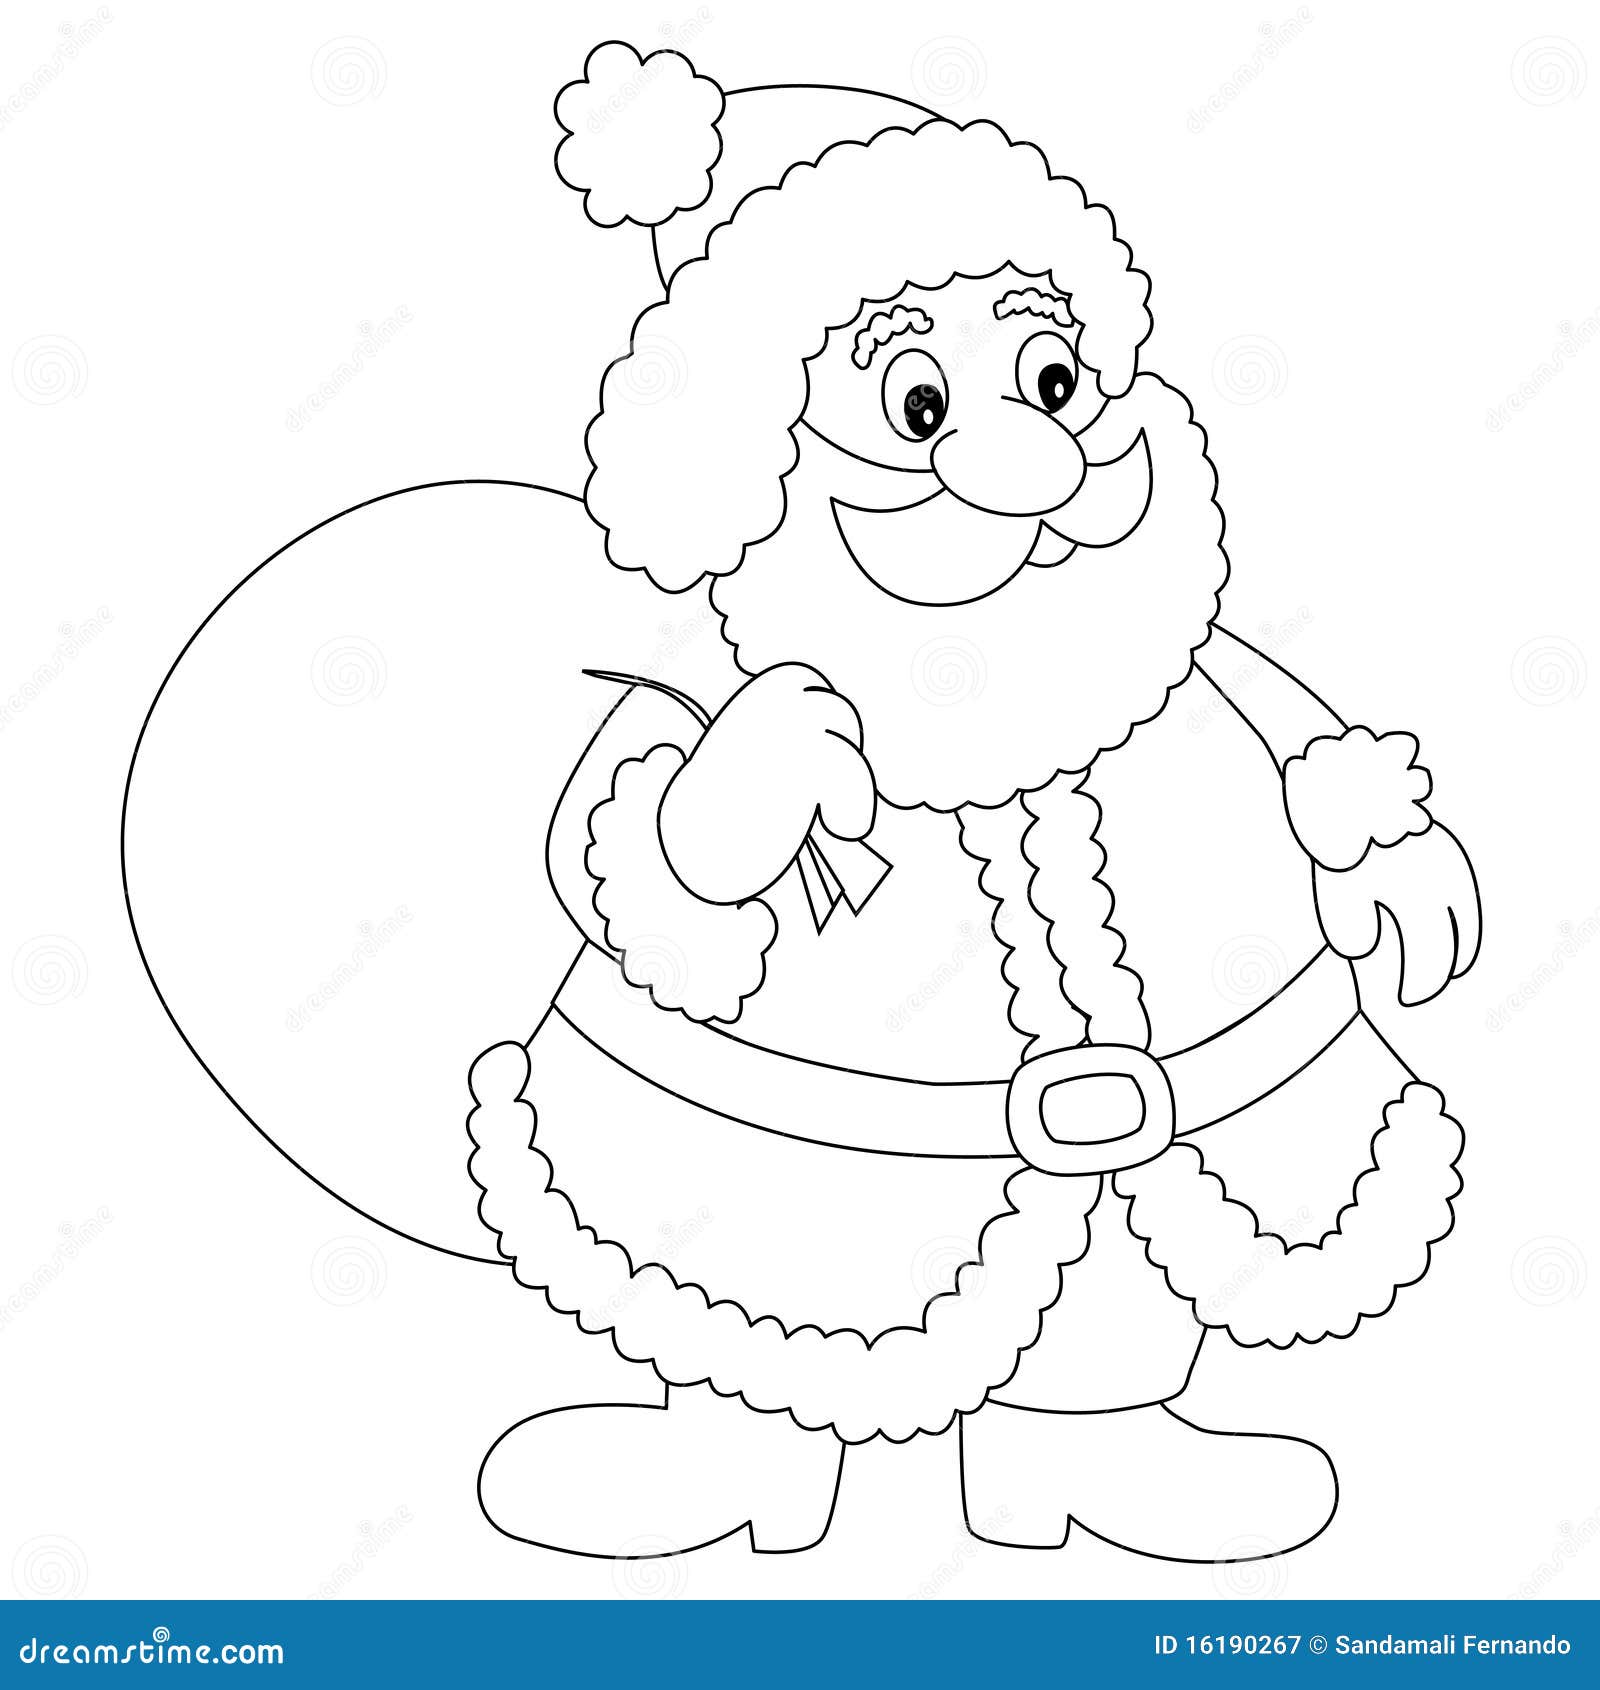 Santa Claus Outline  Santa claus drawing easy Santa claus drawing Merry  christmas coloring pages